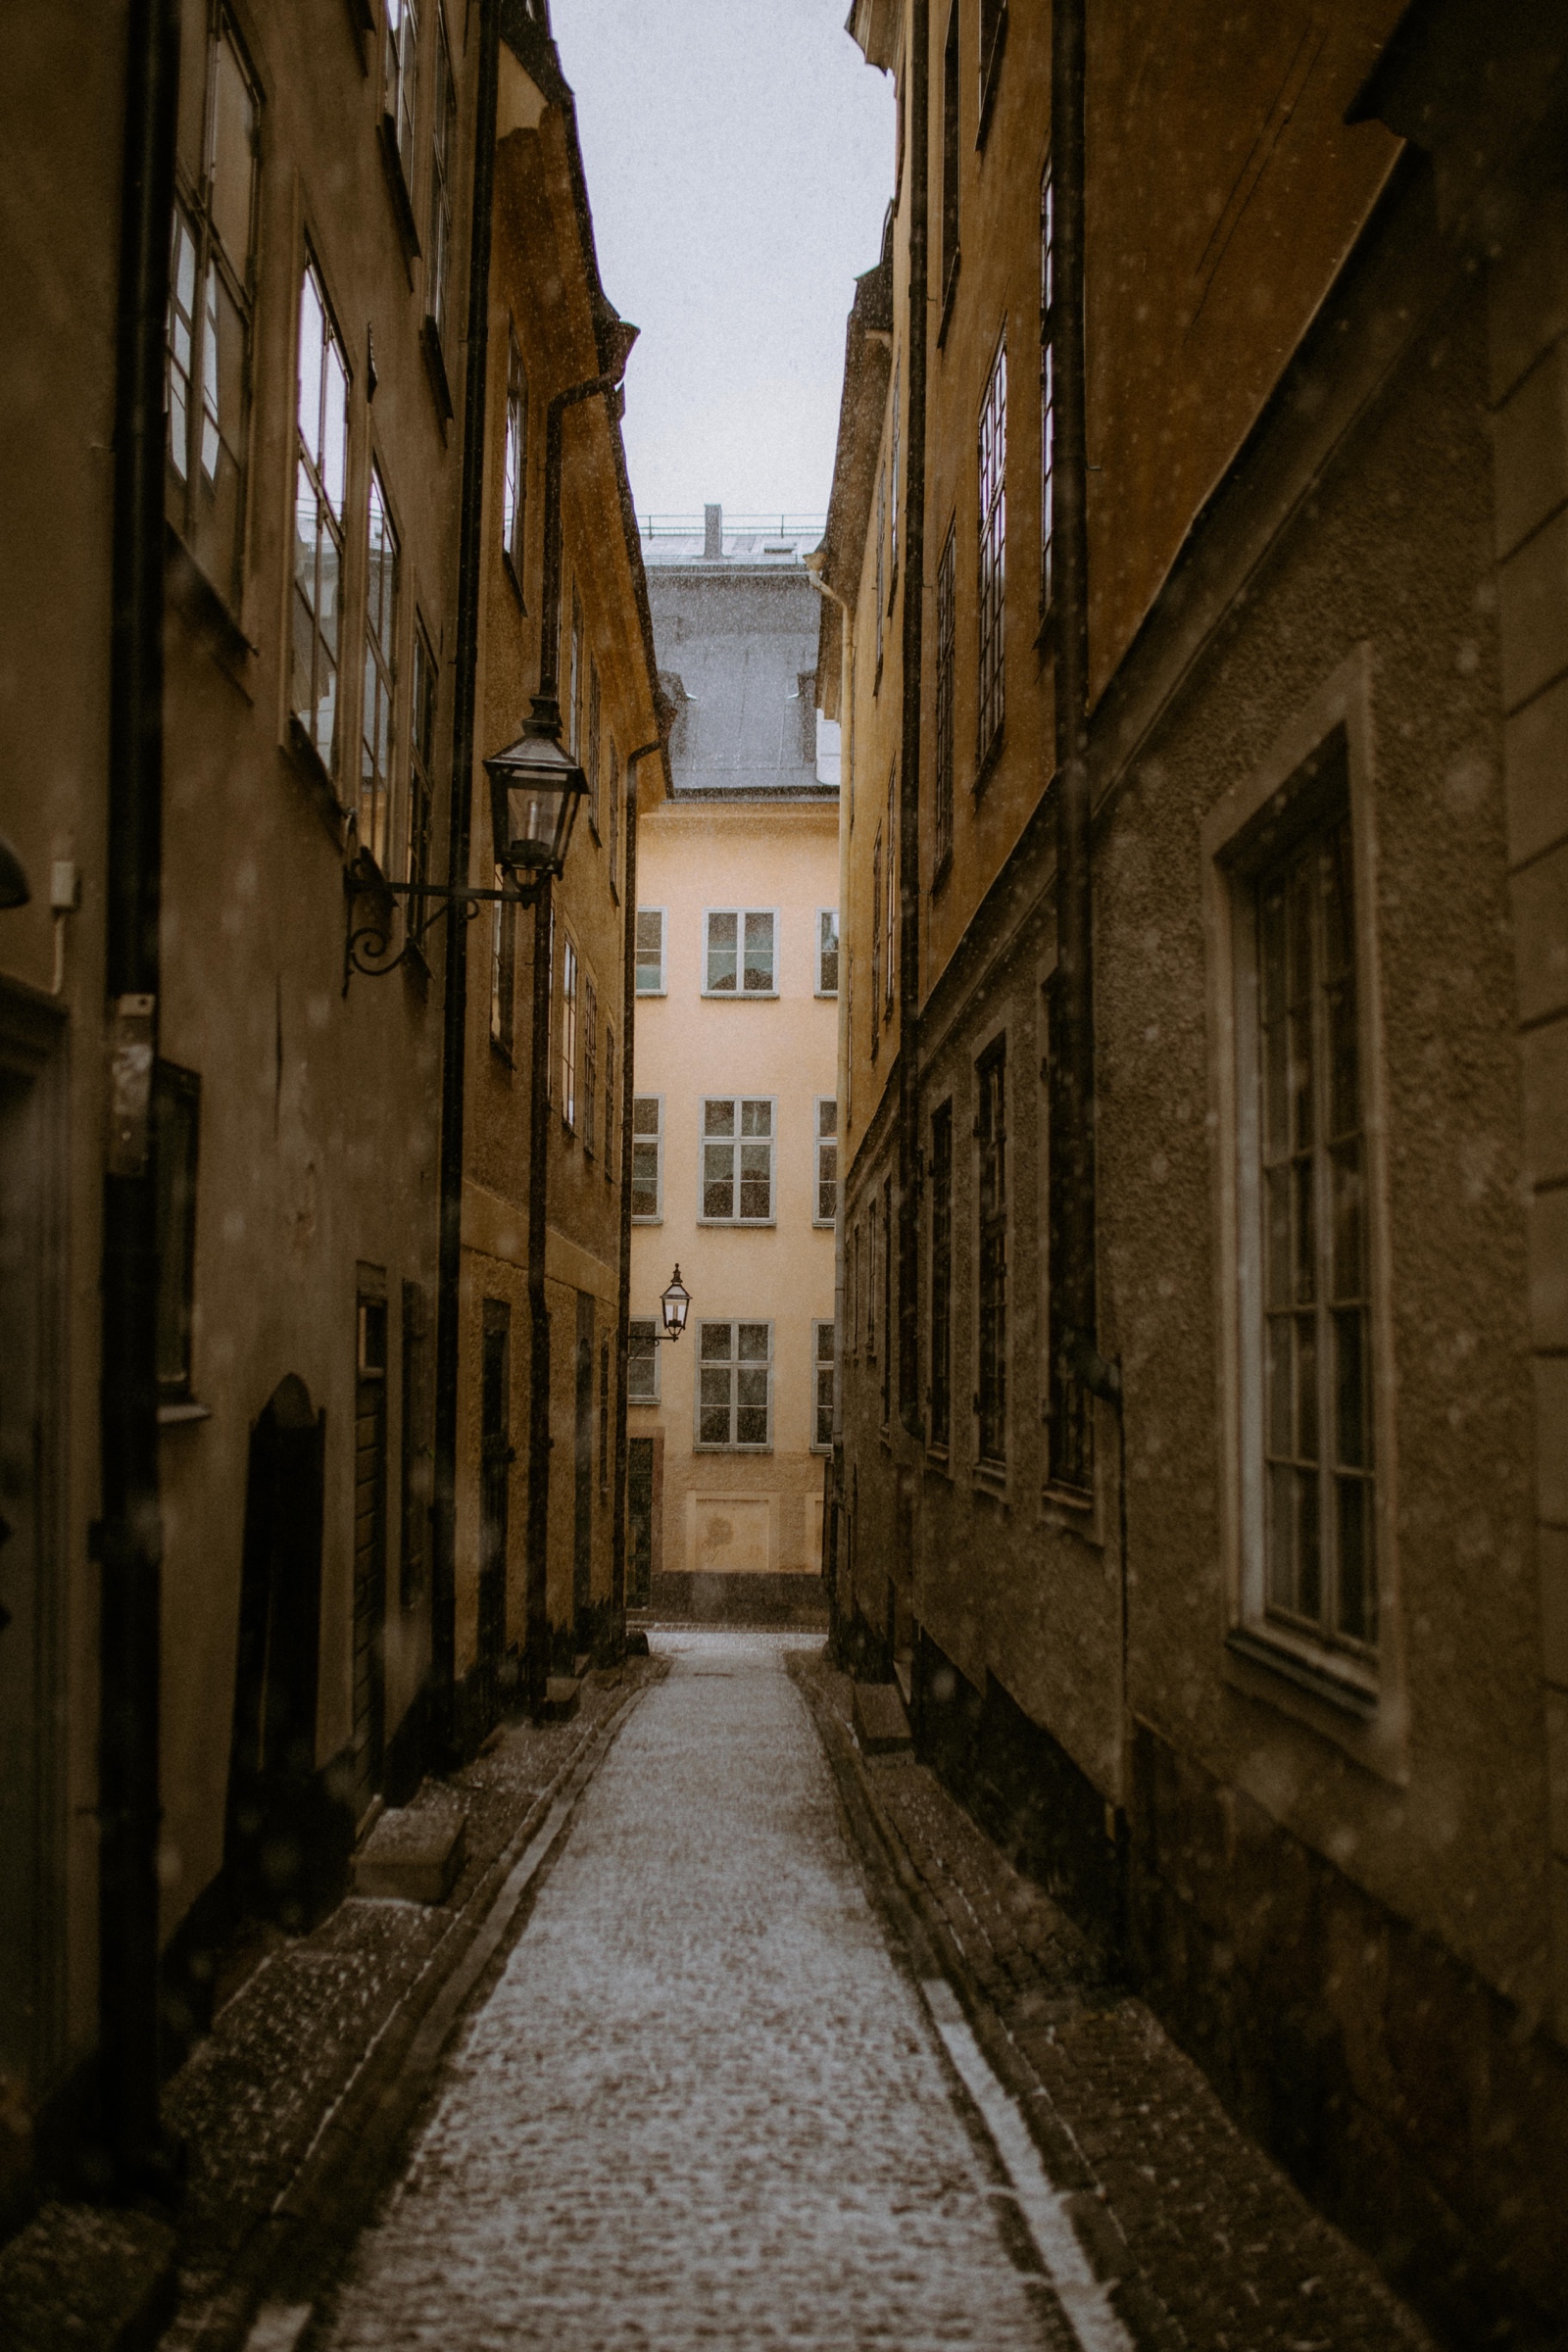 streets of Stockholm